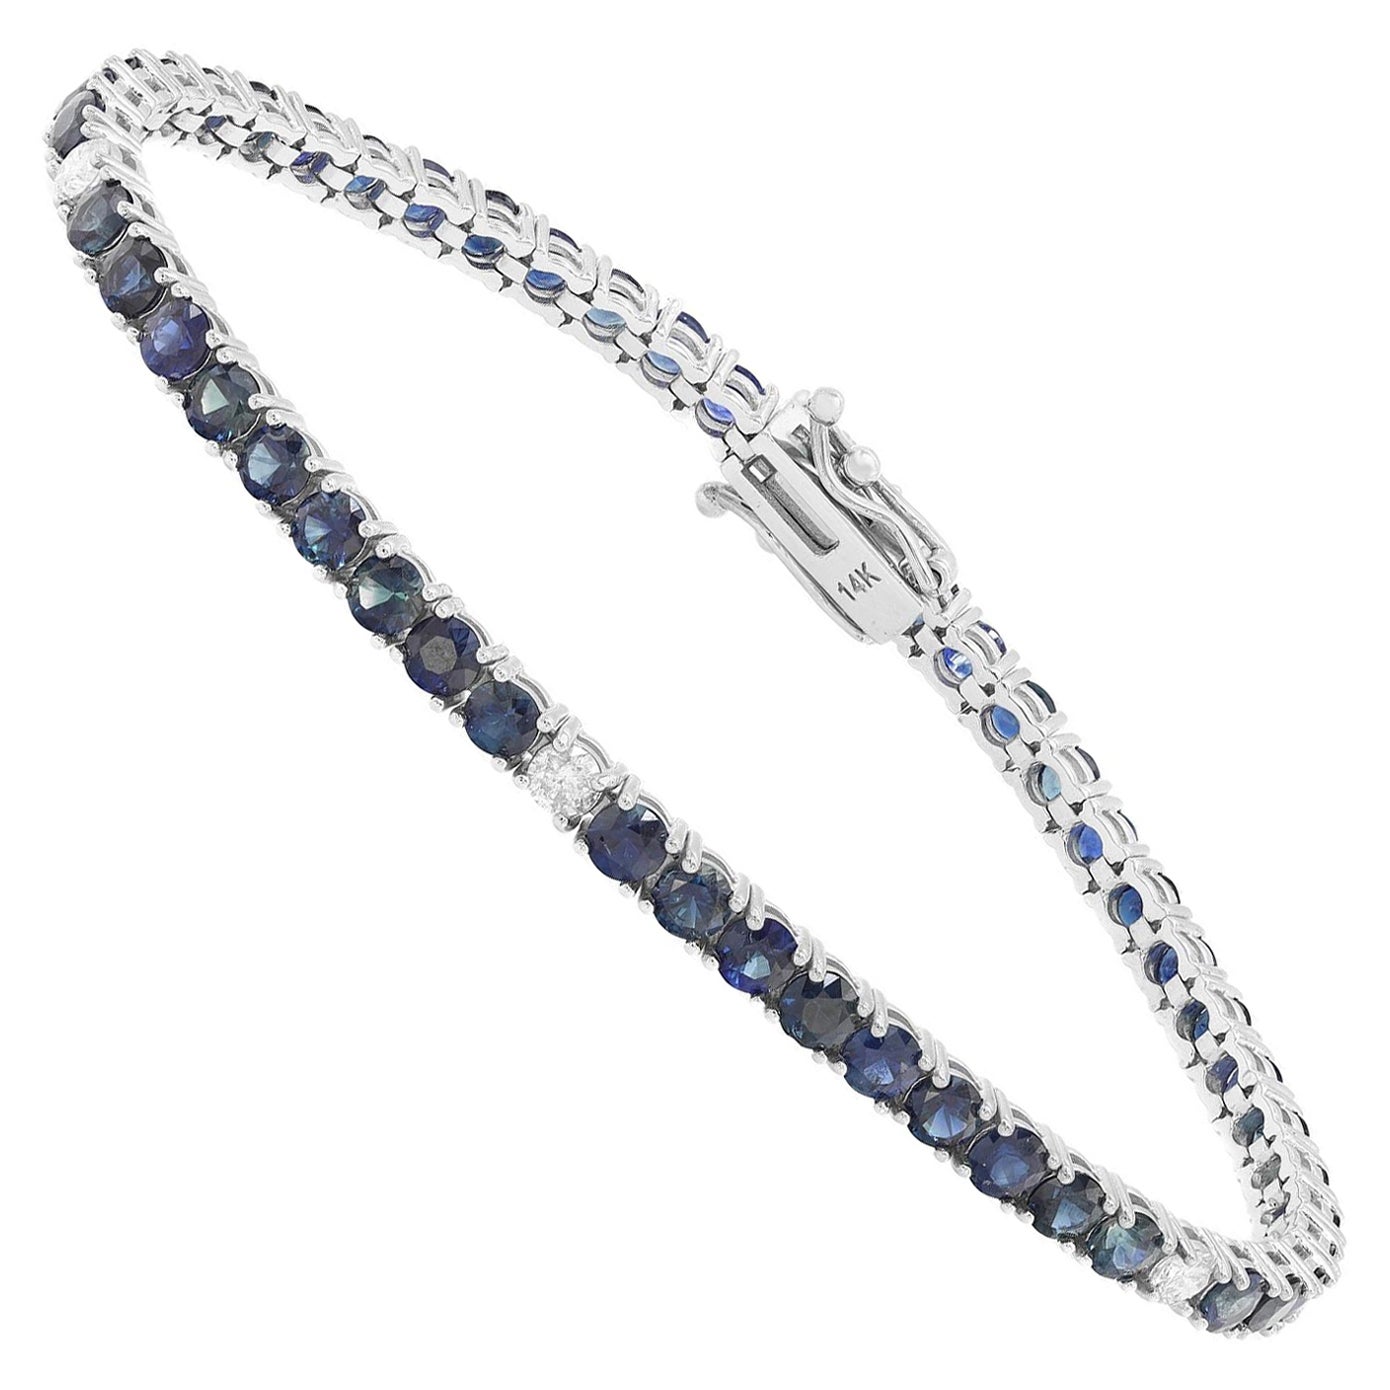 This beautifully crafted tennis bracelet features round cut blue sapphires and diamonds encrusted in four prong setting. Crafted in 14k white gold. Total diamond weight: 0.32 carat. Diamond Quality: H color and VS-SI clarity. Total sapphire weight: